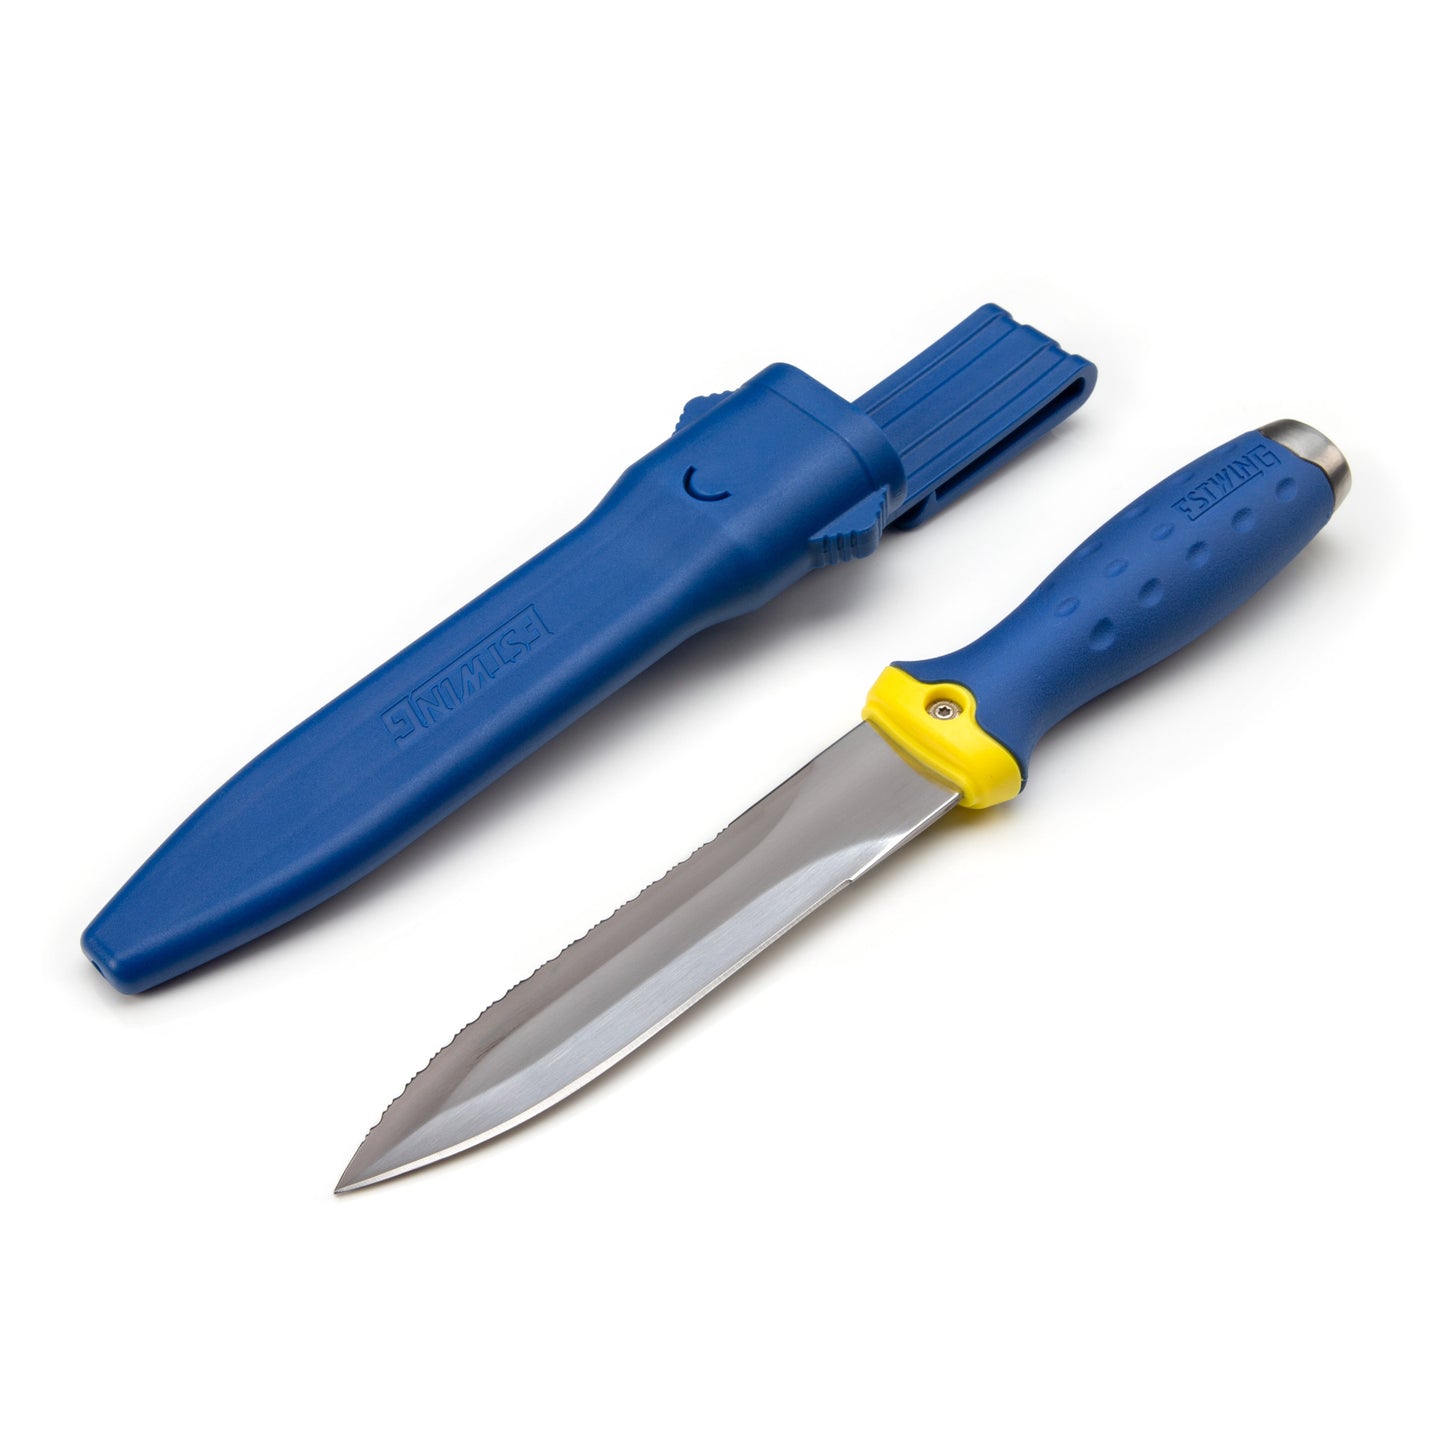 5.5-Inch Fixed Blade Double-Edged Multi-Purpose Duct Knife with Serrated and Smooth Edges and Hard Nylon Sheath